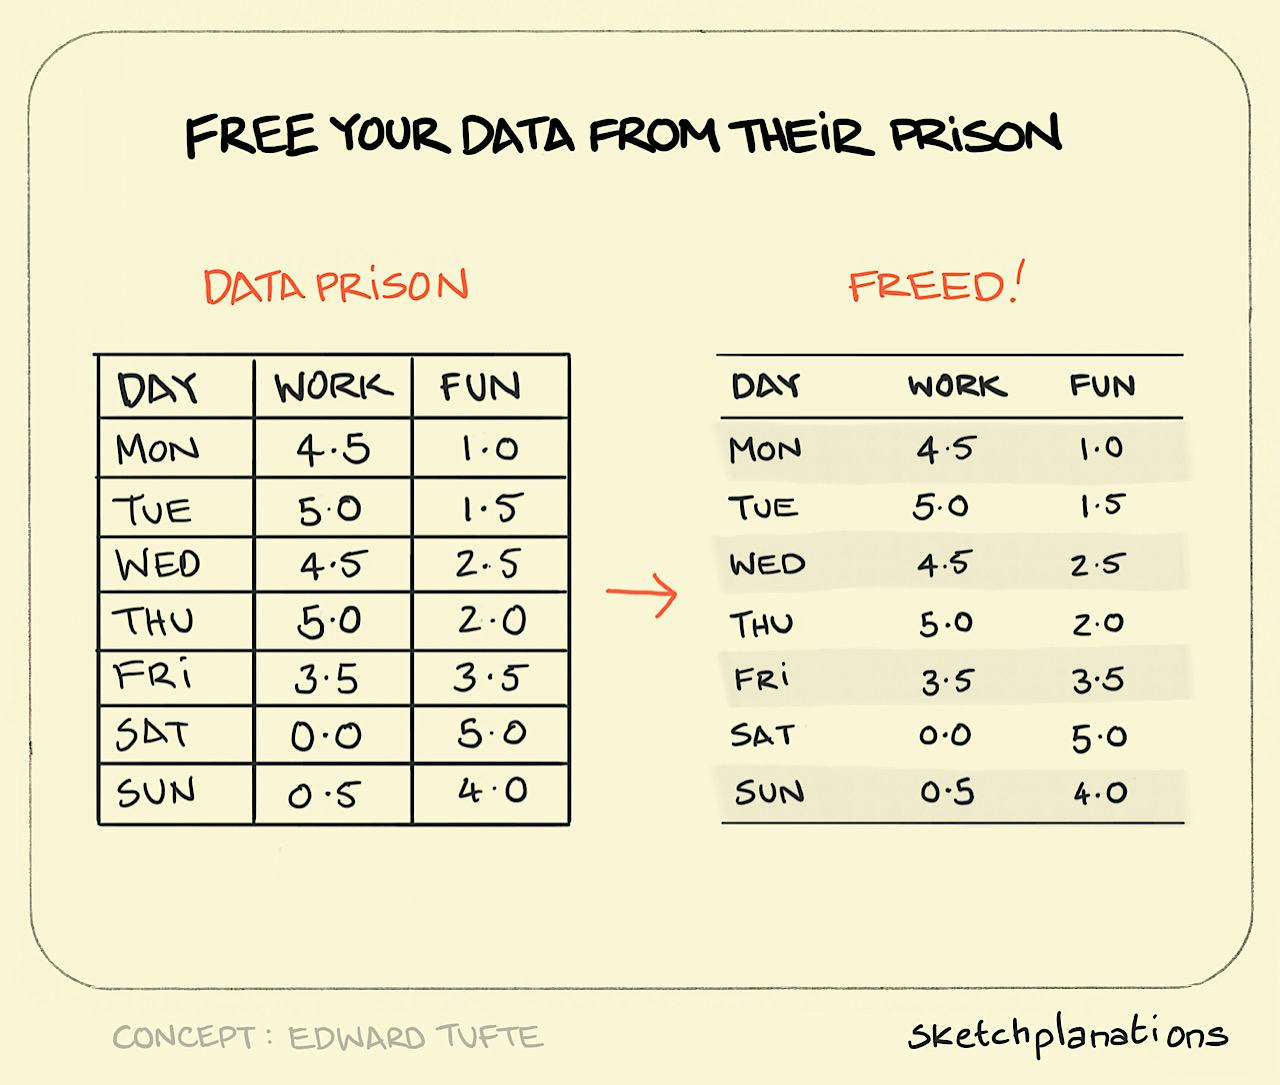 The data prison - Sketchplanations